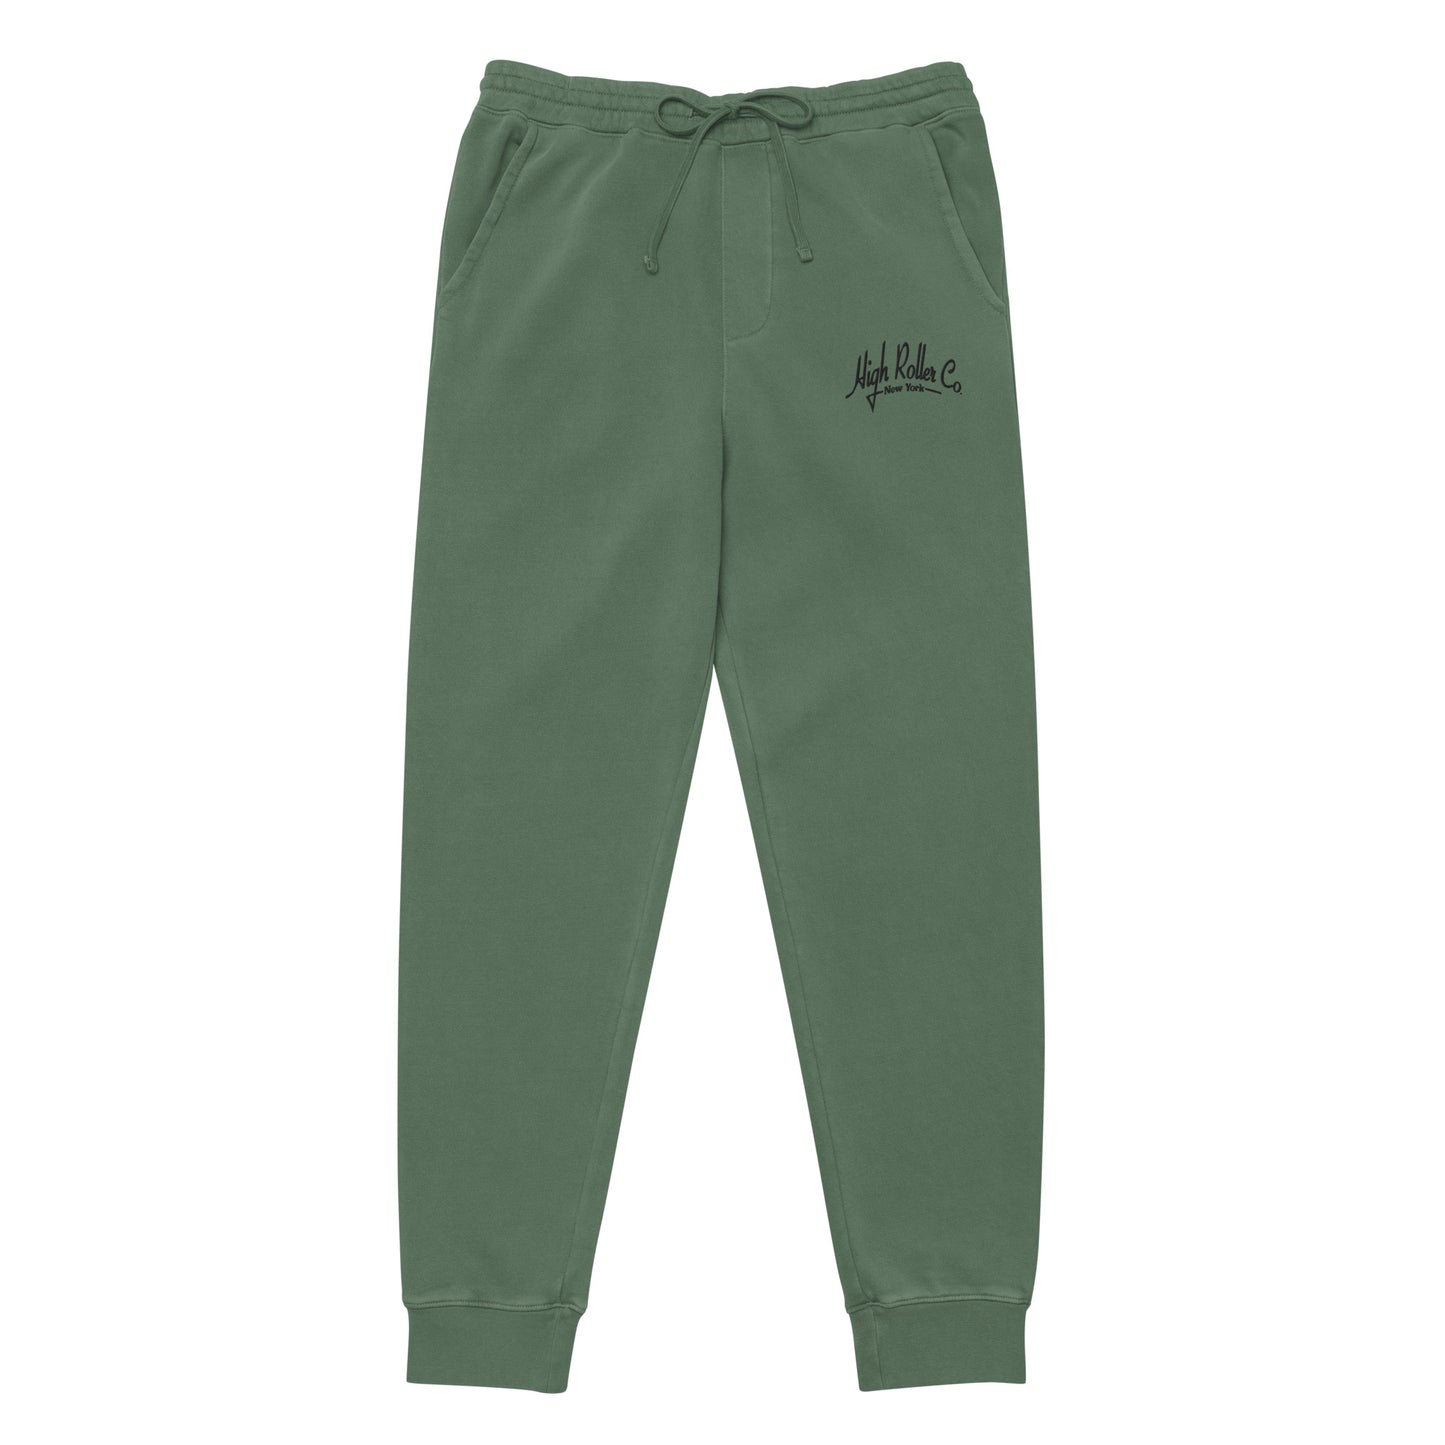 High Roller Co. Pigment-Dyed Embroidered Arc Logo Sweatpants